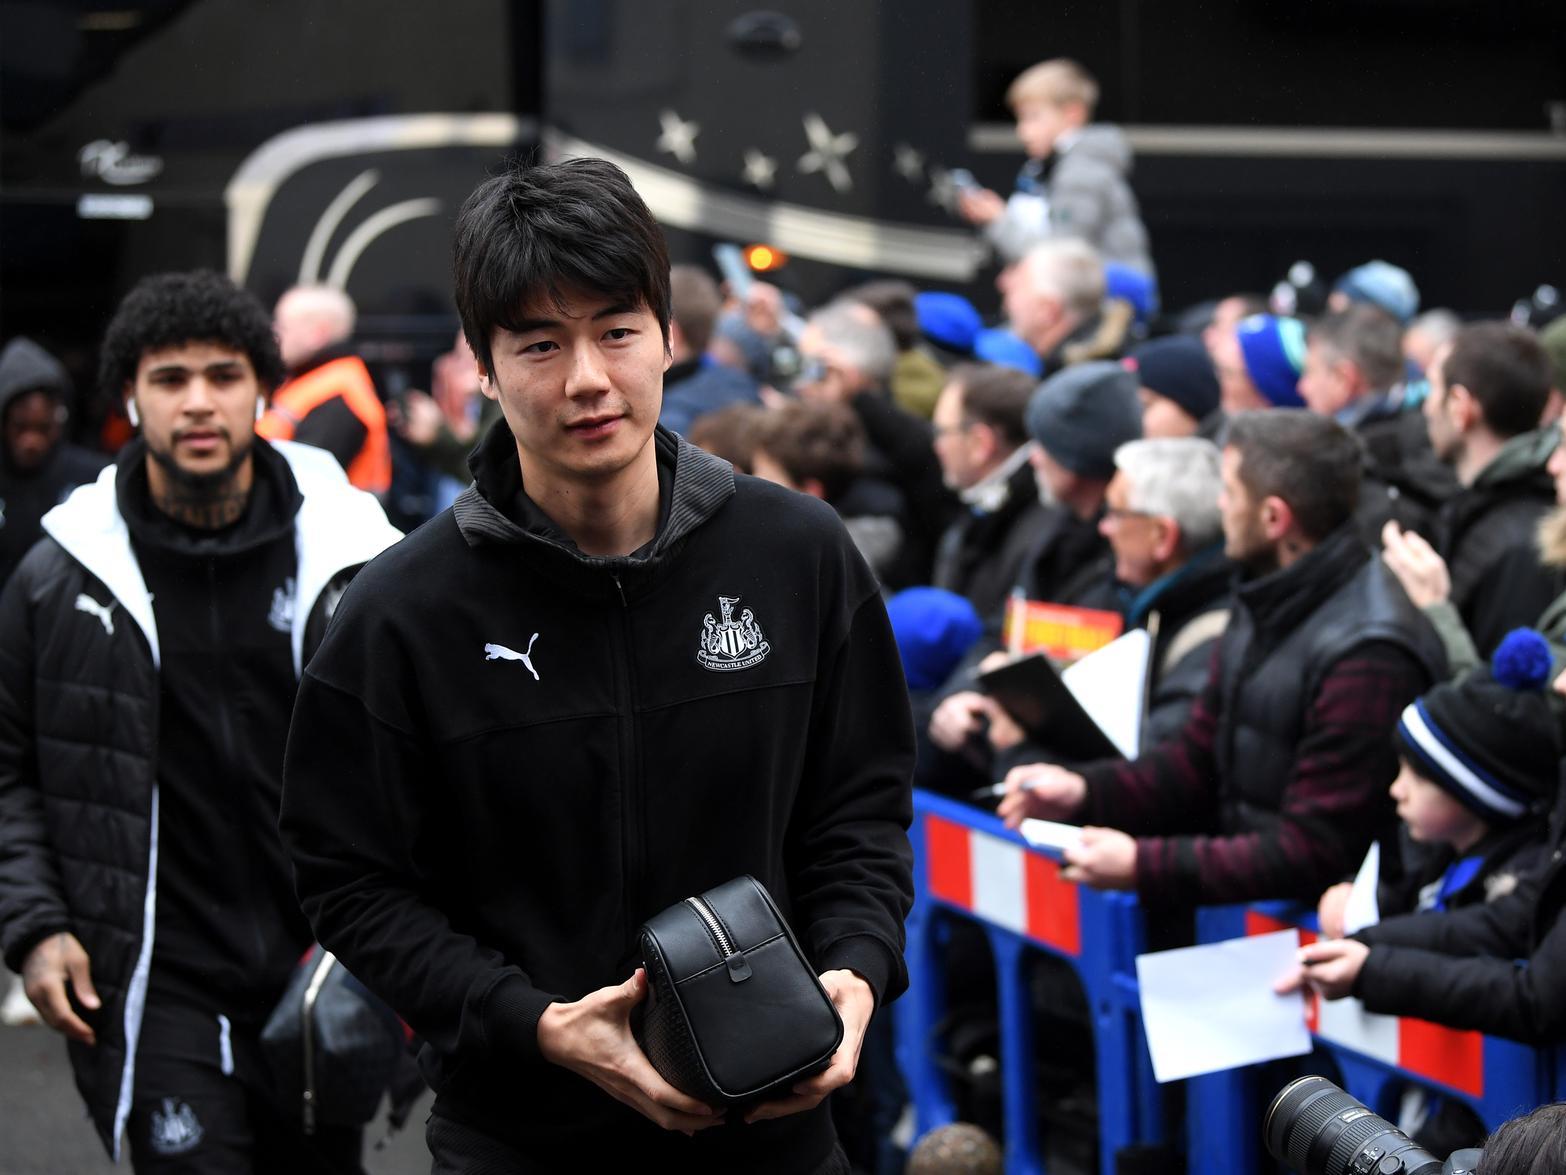 Celtic have been linked with Newcastle United midfielder Ki Sung-yueng but will struggle to pay his wages. (HITC)